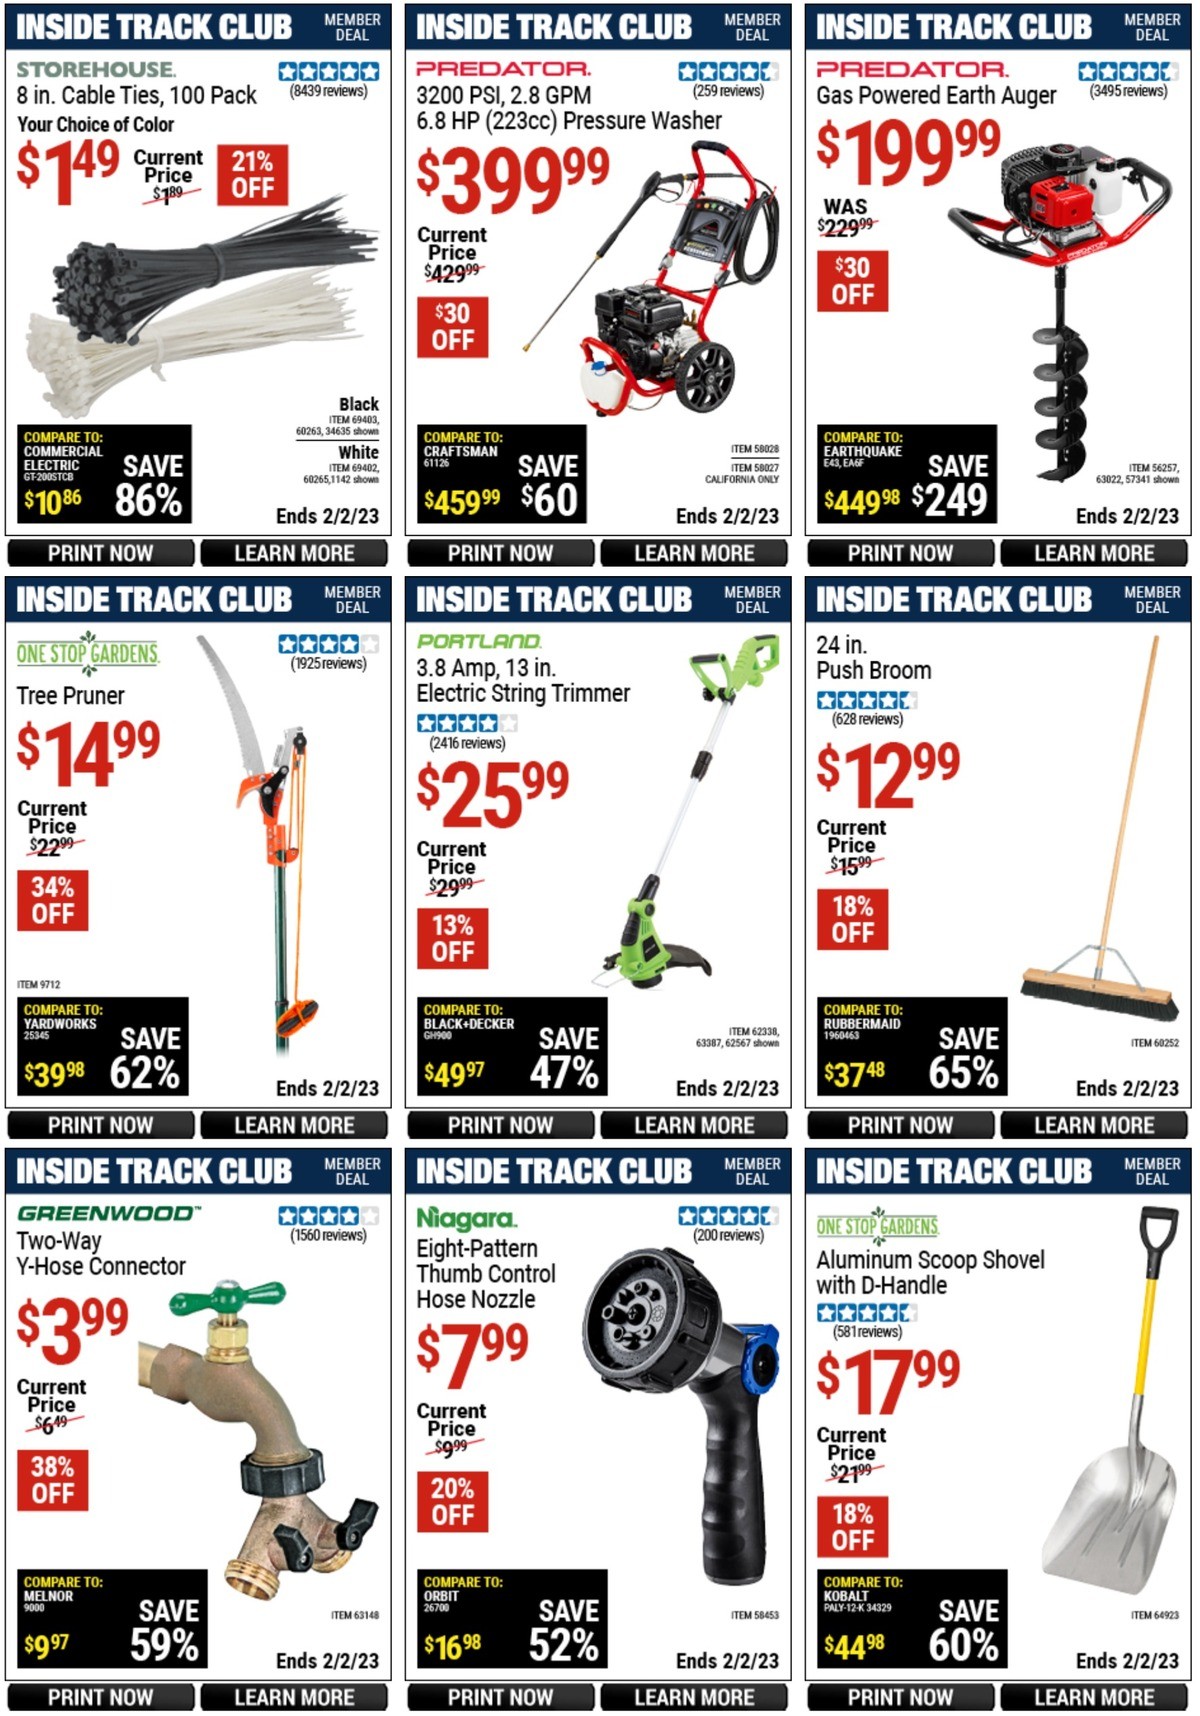 Harbor Freight Tools Inside Track Club Member Deals Weekly Ad from January 6